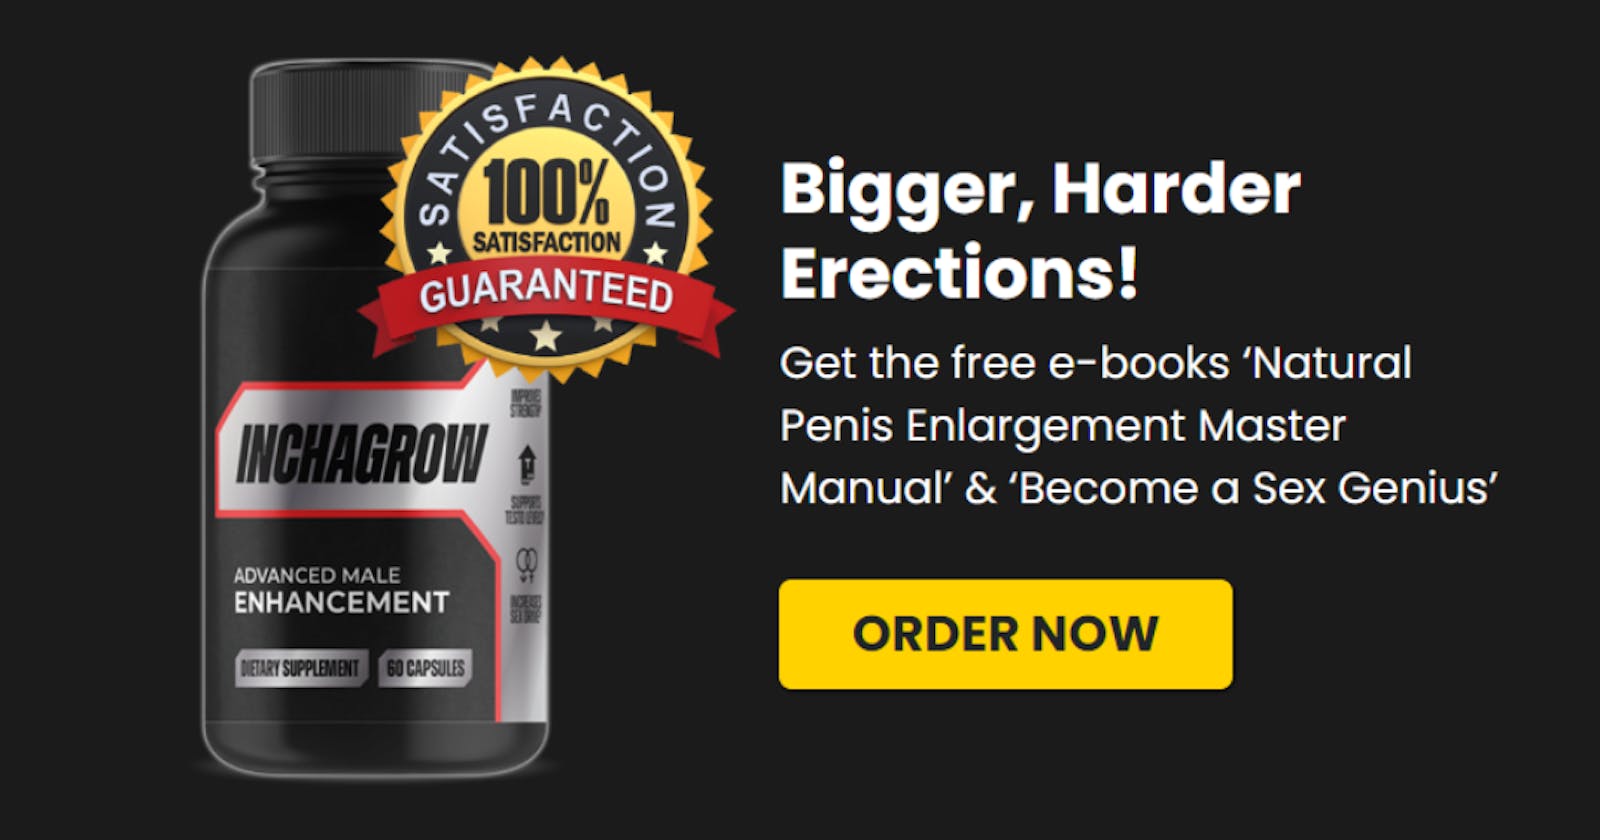 Inchagrow Male Enhancement: Can It Help Men Improve Their Sexual Performance?